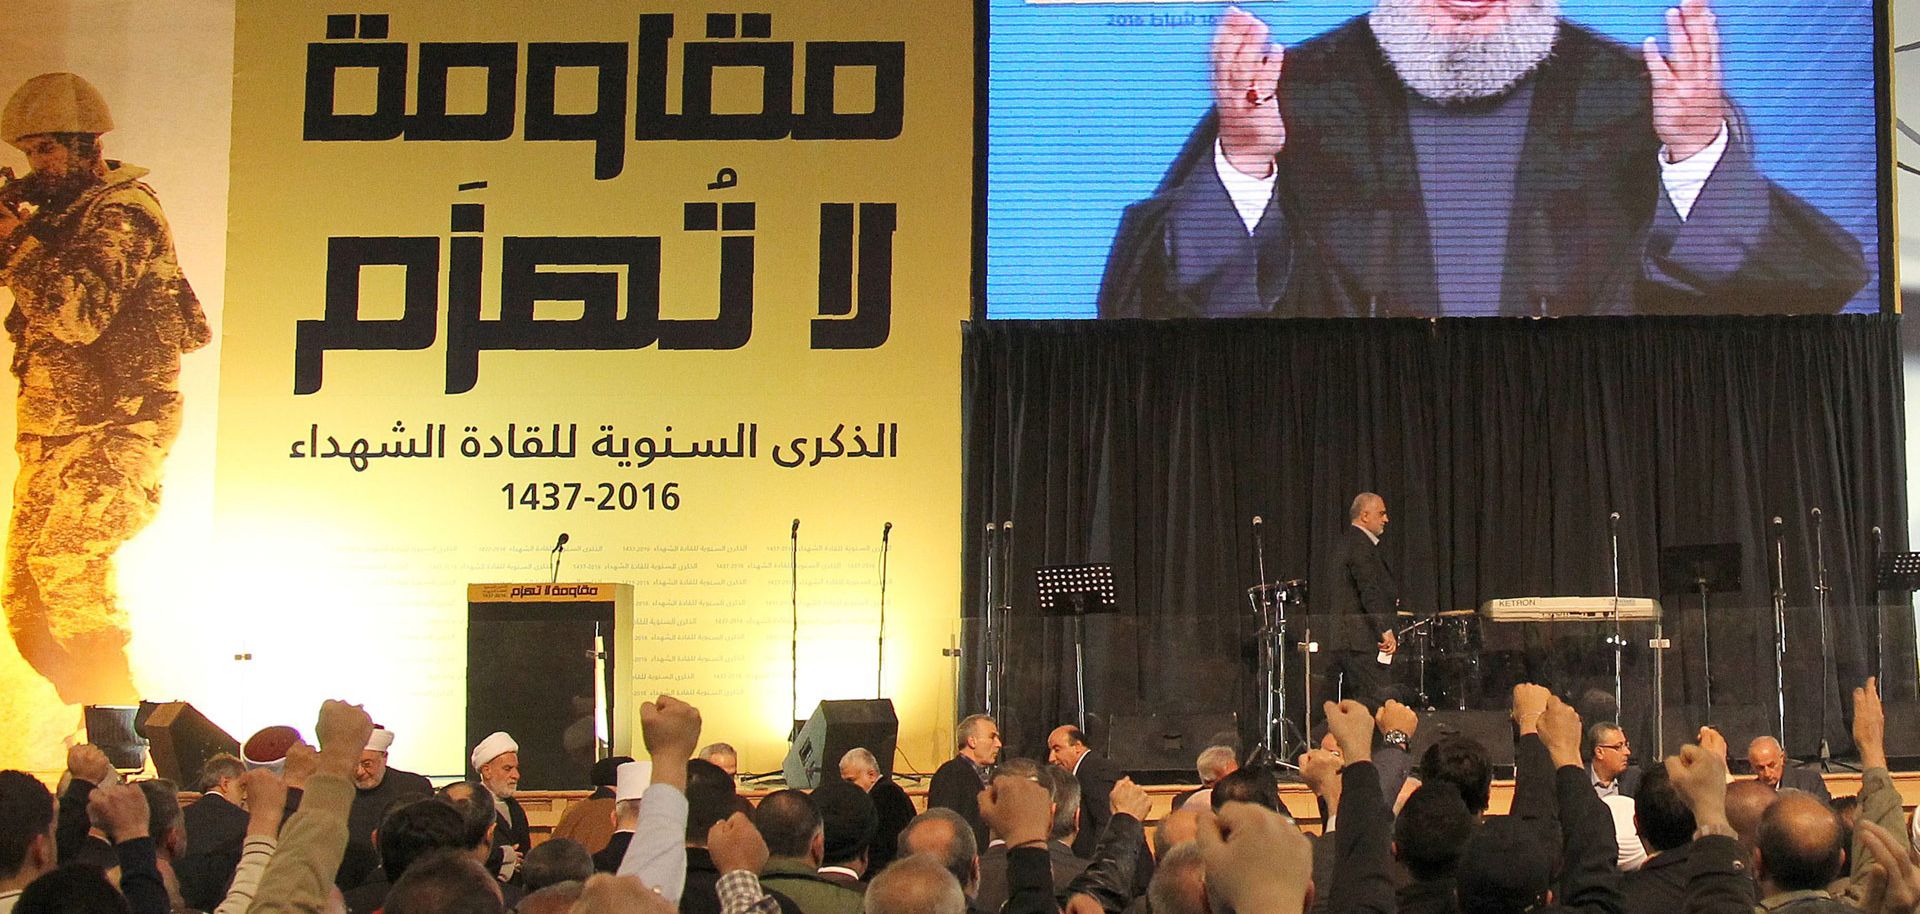 The Head of Lebanon's Shiite movement Hezbollah, Hassan Nasrallah, is seen on a giant screen as he addresses the crowd in a televised speech from an undisclosed location during a rally held in the southern suburbs of Beirut on February 16, 2016, to mark the anniversary of the Israeli killings of Lebanese Hezbollah commanders Ragheb Harb, Abbas al-Mussawi and Imad Mughnieh. Mussawi was killed on February 16, 1992 in an Israeli air raid on Nabatiyeh, Harb was assassinated in south Lebanon during Israel's occu